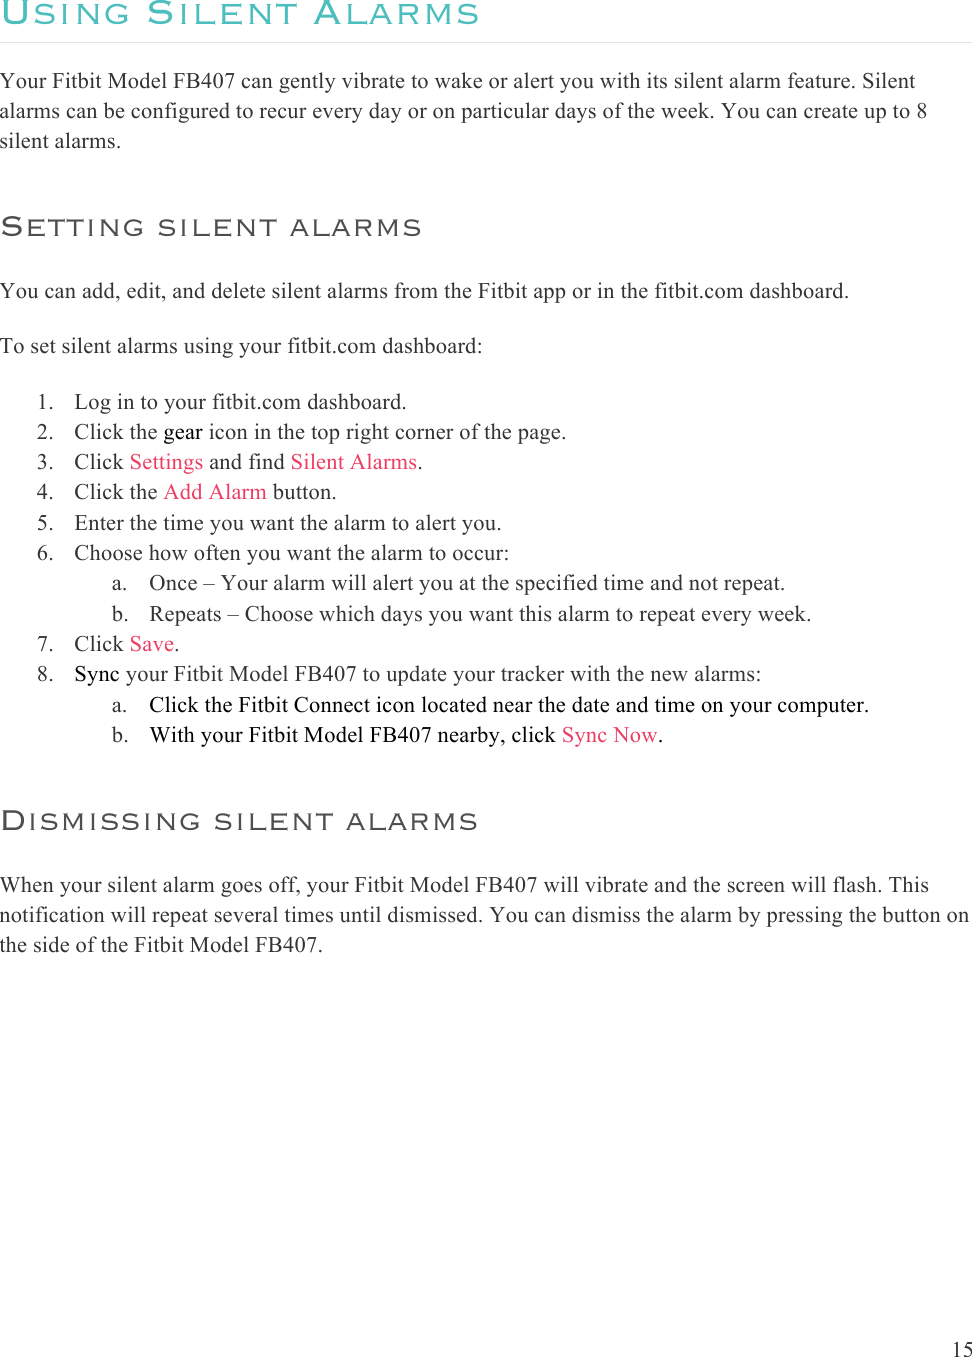  15  Using Silent Alarms Your Fitbit Model FB407 can gently vibrate to wake or alert you with its silent alarm feature. Silent alarms can be configured to recur every day or on particular days of the week. You can create up to 8 silent alarms. Setting silent alarms You can add, edit, and delete silent alarms from the Fitbit app or in the fitbit.com dashboard. To set silent alarms using your fitbit.com dashboard:  1. Log in to your fitbit.com dashboard.  2. Click the gear icon in the top right corner of the page.  3. Click Settings and find Silent Alarms. 4. Click the Add Alarm button. 5. Enter the time you want the alarm to alert you. 6. Choose how often you want the alarm to occur: a. Once – Your alarm will alert you at the specified time and not repeat. b. Repeats – Choose which days you want this alarm to repeat every week. 7. Click Save. 8. Sync your Fitbit Model FB407 to update your tracker with the new alarms: a. Click the Fitbit Connect icon located near the date and time on your computer. b. With your Fitbit Model FB407 nearby, click Sync Now. Dismissing silent alarms When your silent alarm goes off, your Fitbit Model FB407 will vibrate and the screen will flash. This notification will repeat several times until dismissed. You can dismiss the alarm by pressing the button on the side of the Fitbit Model FB407.  